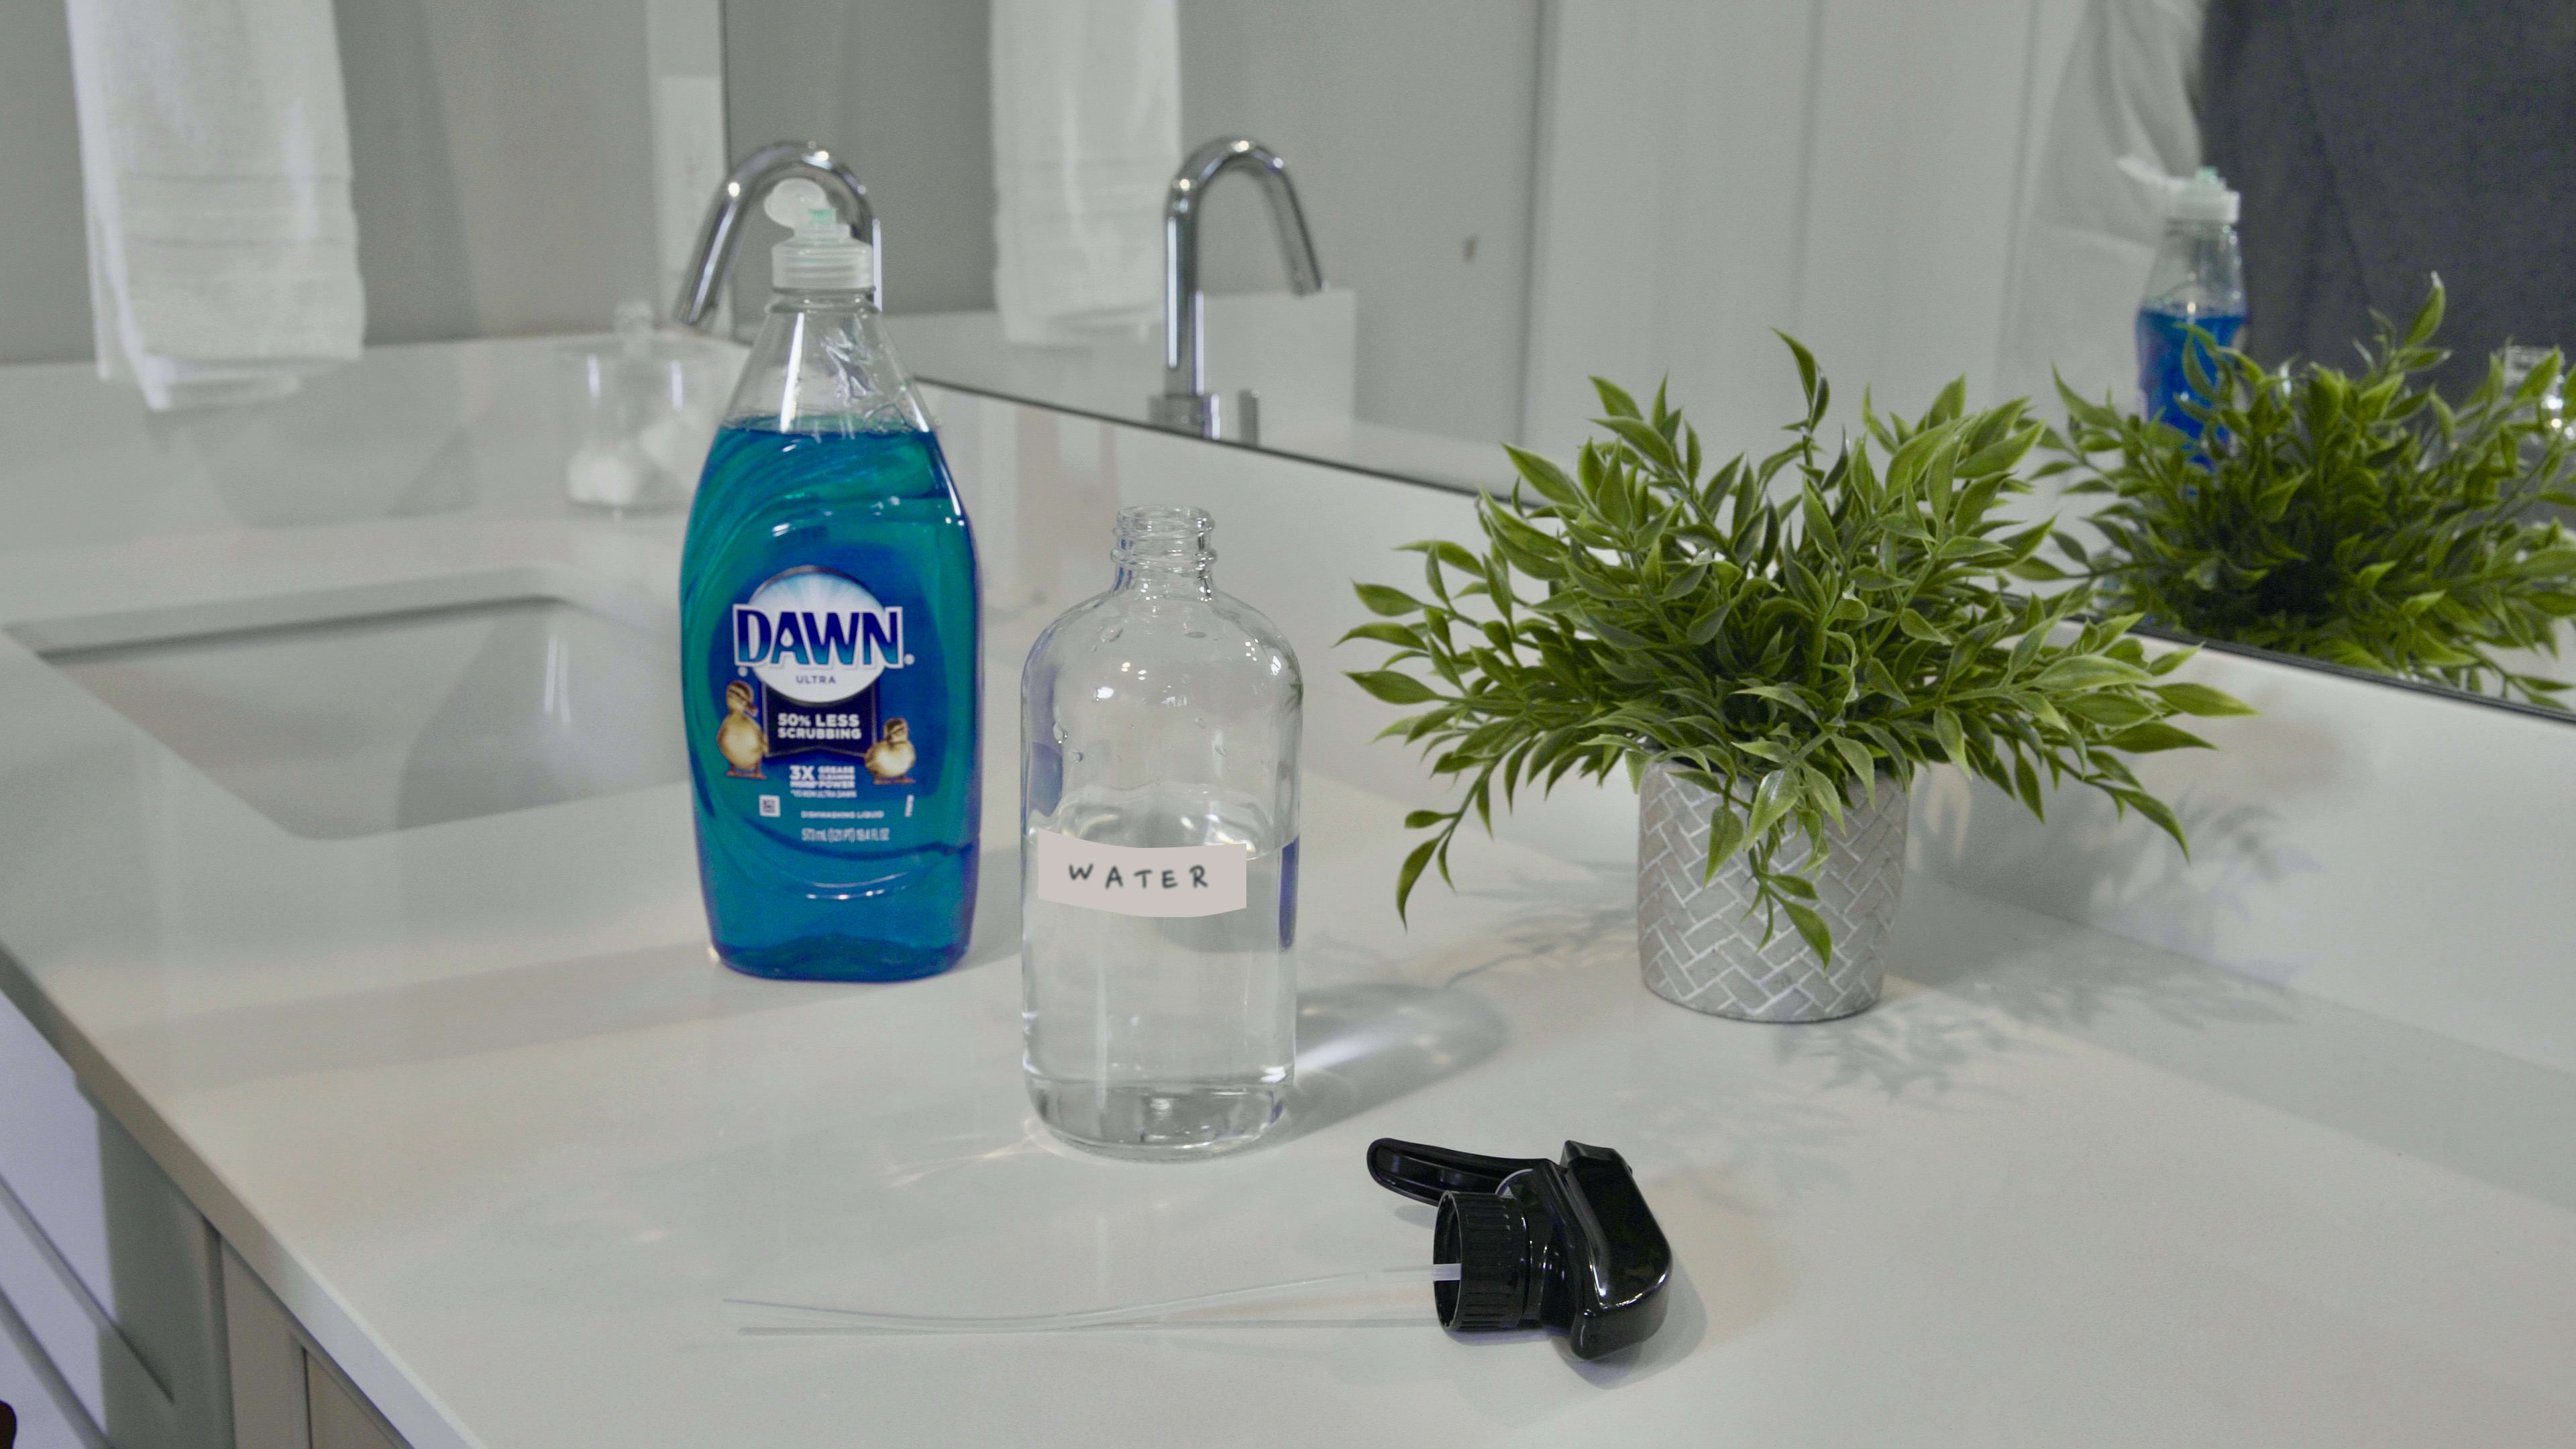 The Best Glass Cleaners For Your Shower Doors